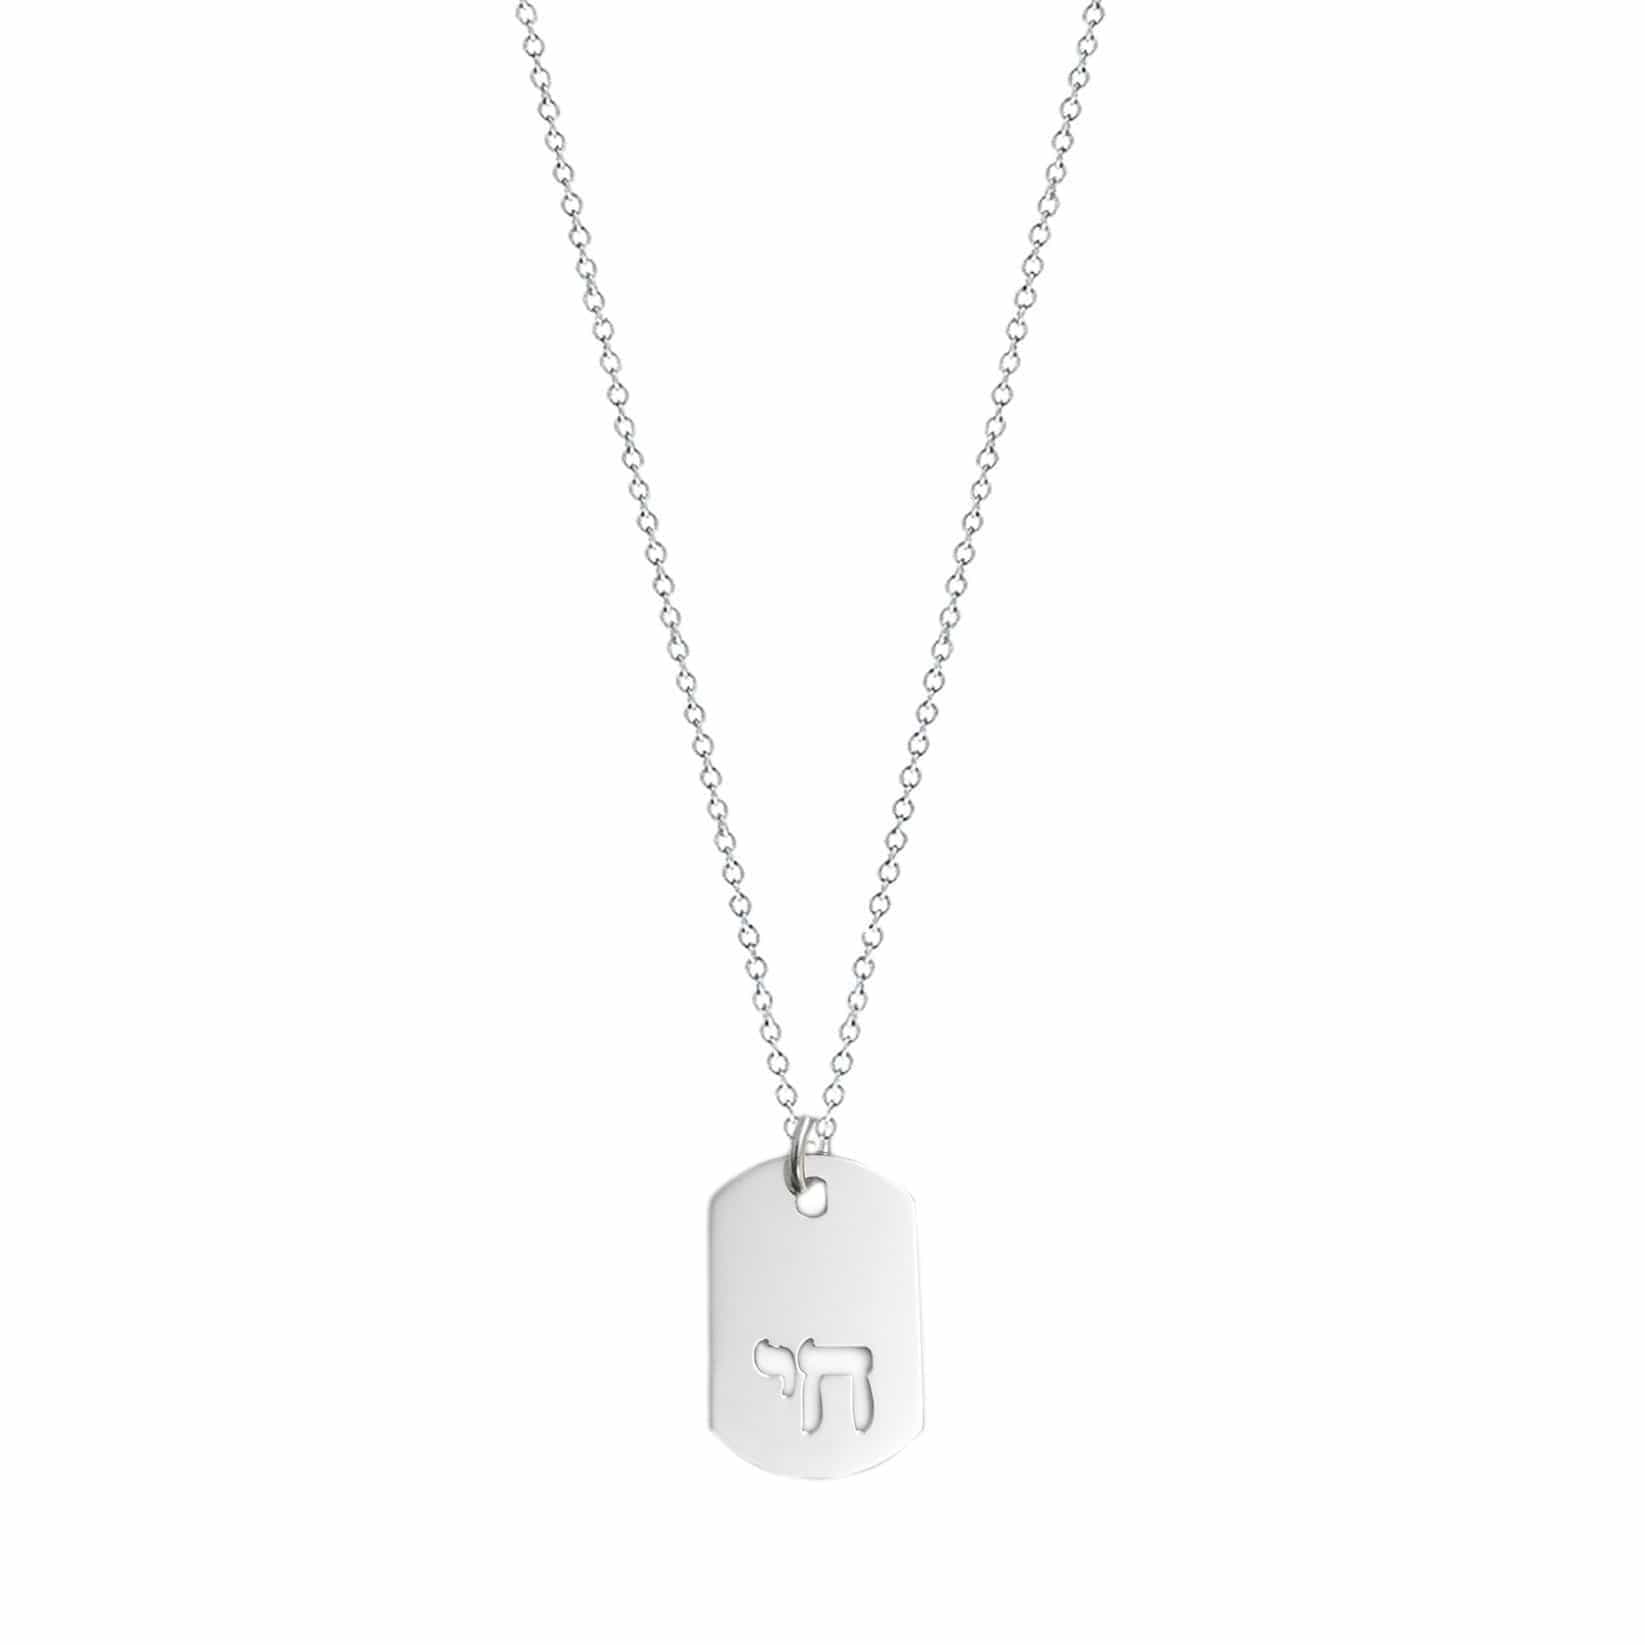 Miriam Merenfeld Jewelry Necklaces Men's Chai ID Tag Necklace